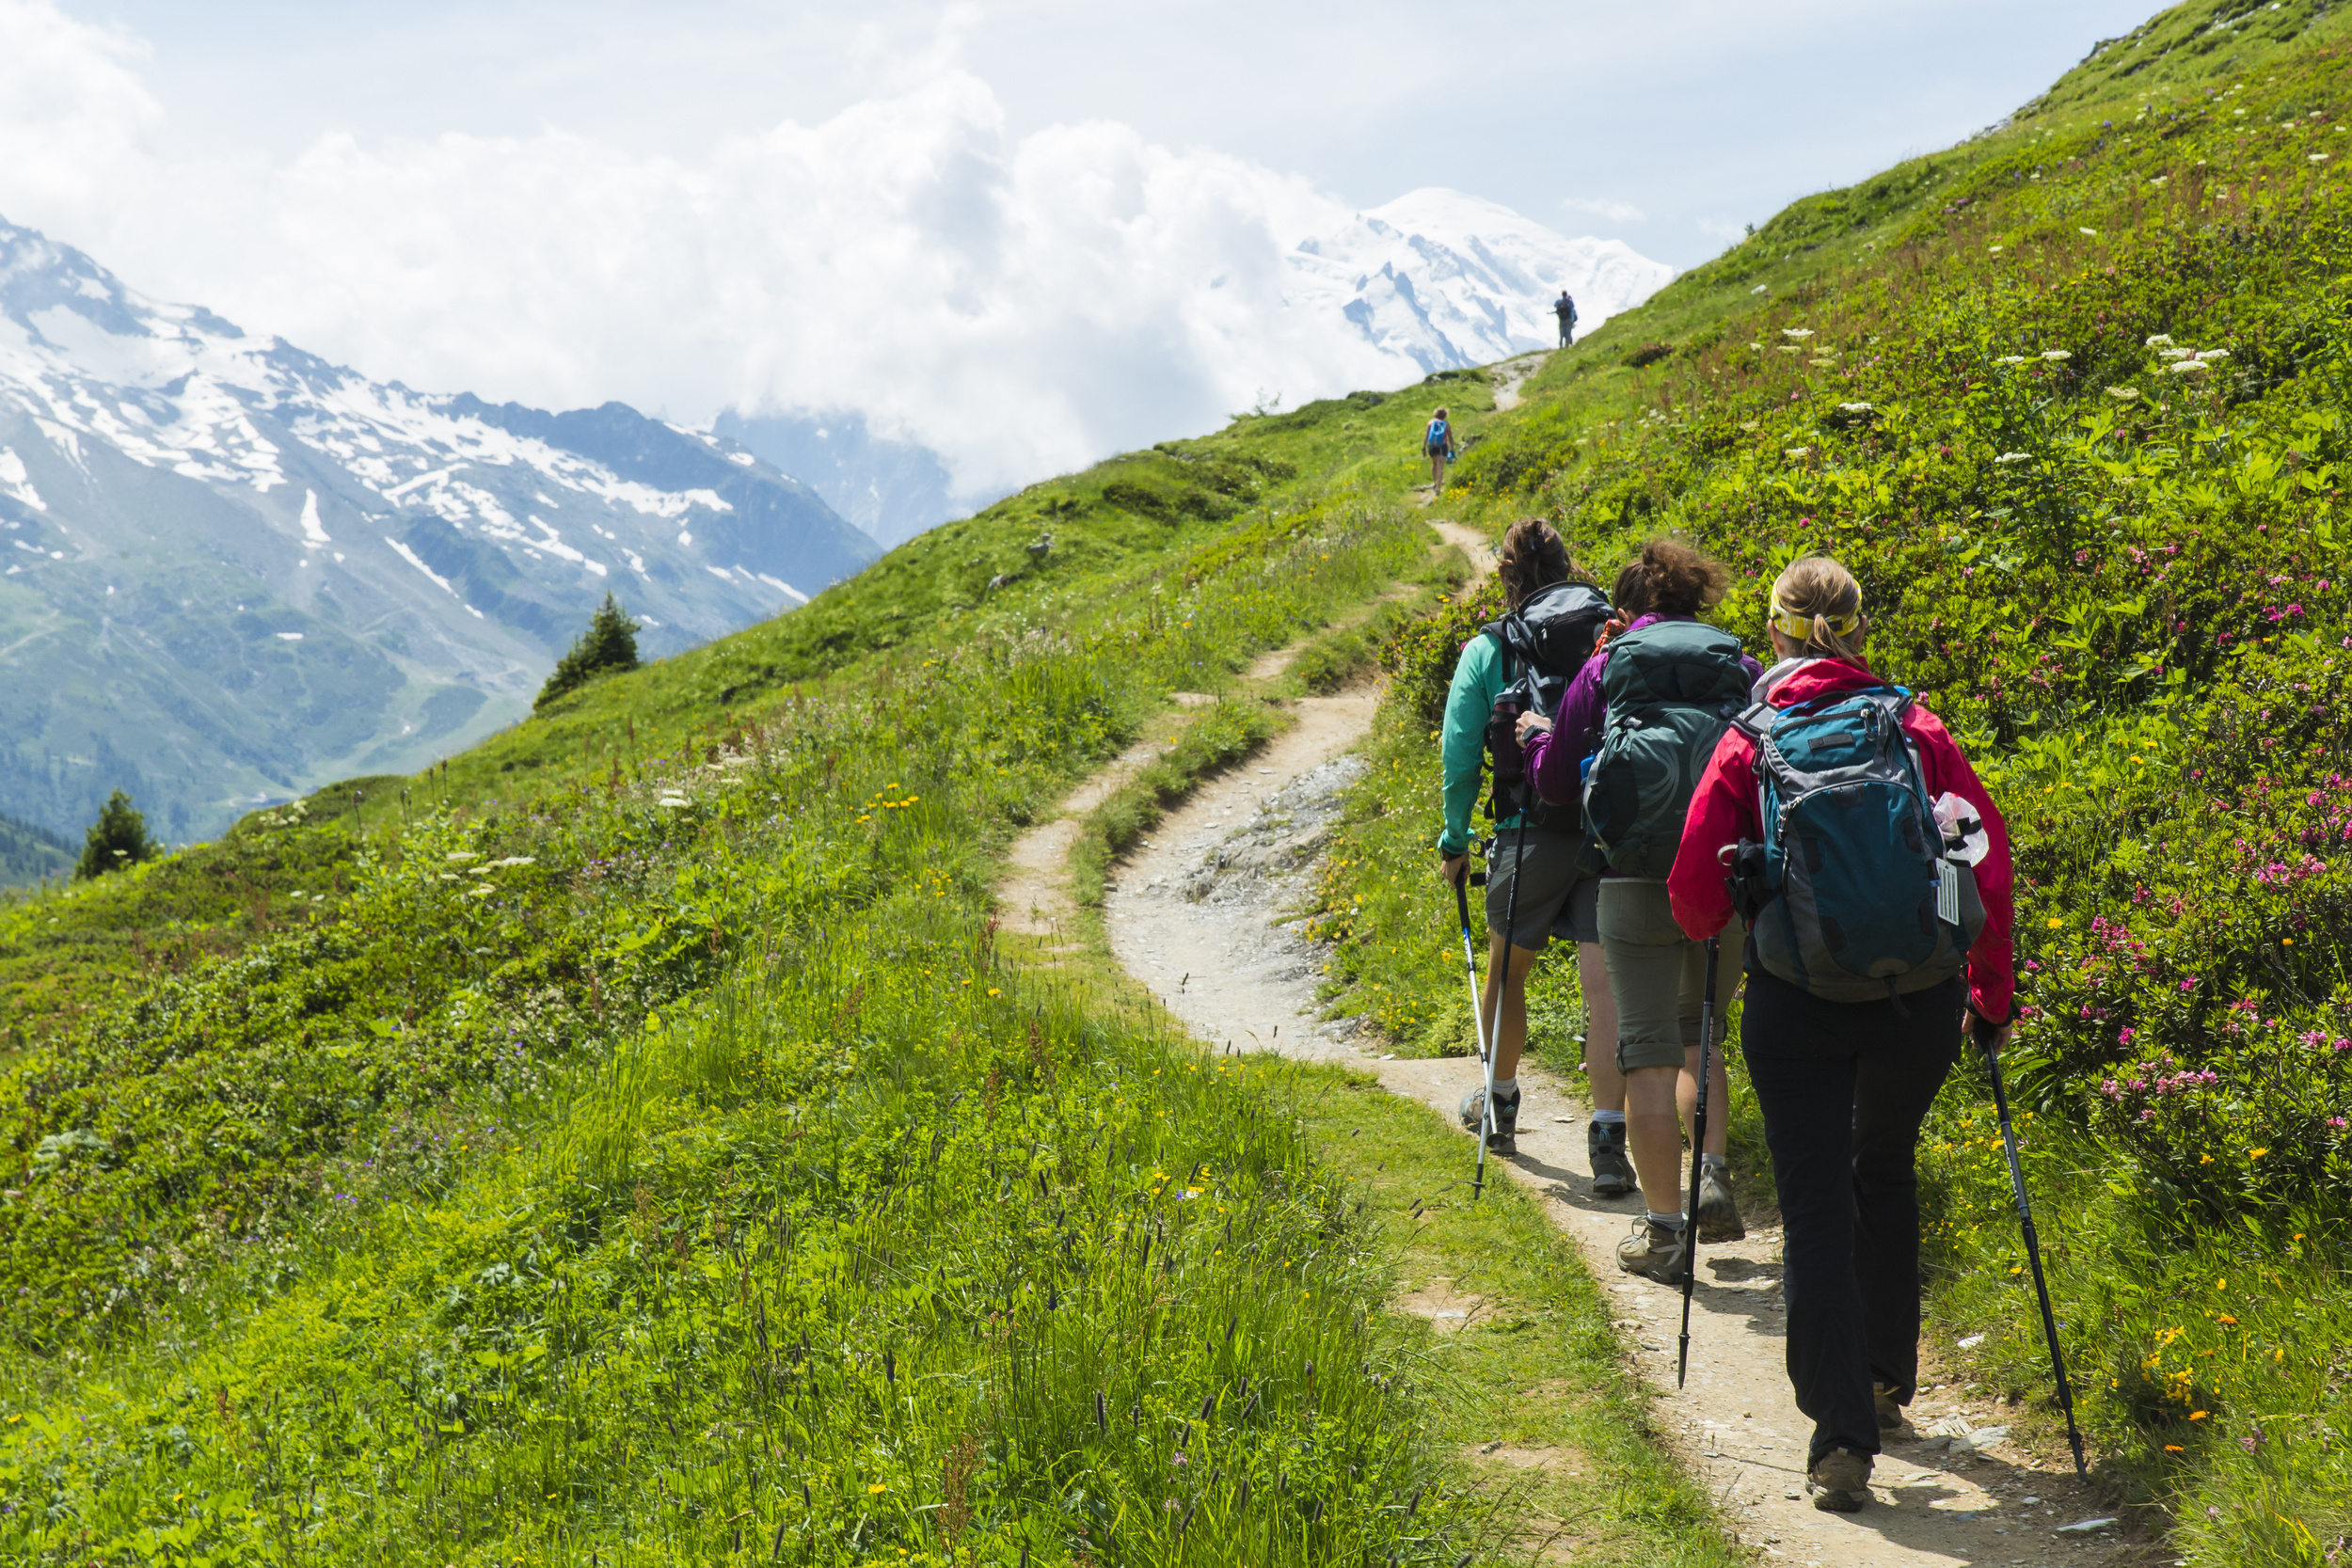 <p>The Alps are definitely more of a hiking than a walking destination, but with sweeping mountain and lake views, you won’t want to do much else! Base yourself in Grenoble, Annecy, or Chamonix, and enjoy trails that start right from town.</p><p><a href='https://www.msn.com/en-us/community/channel/vid-cj9pqbr0vn9in2b6ddcd8sfgpfq6x6utp44fssrv6mc2gtybw0us'>Follow us on MSN to see more of our exclusive lifestyle content.</a></p>